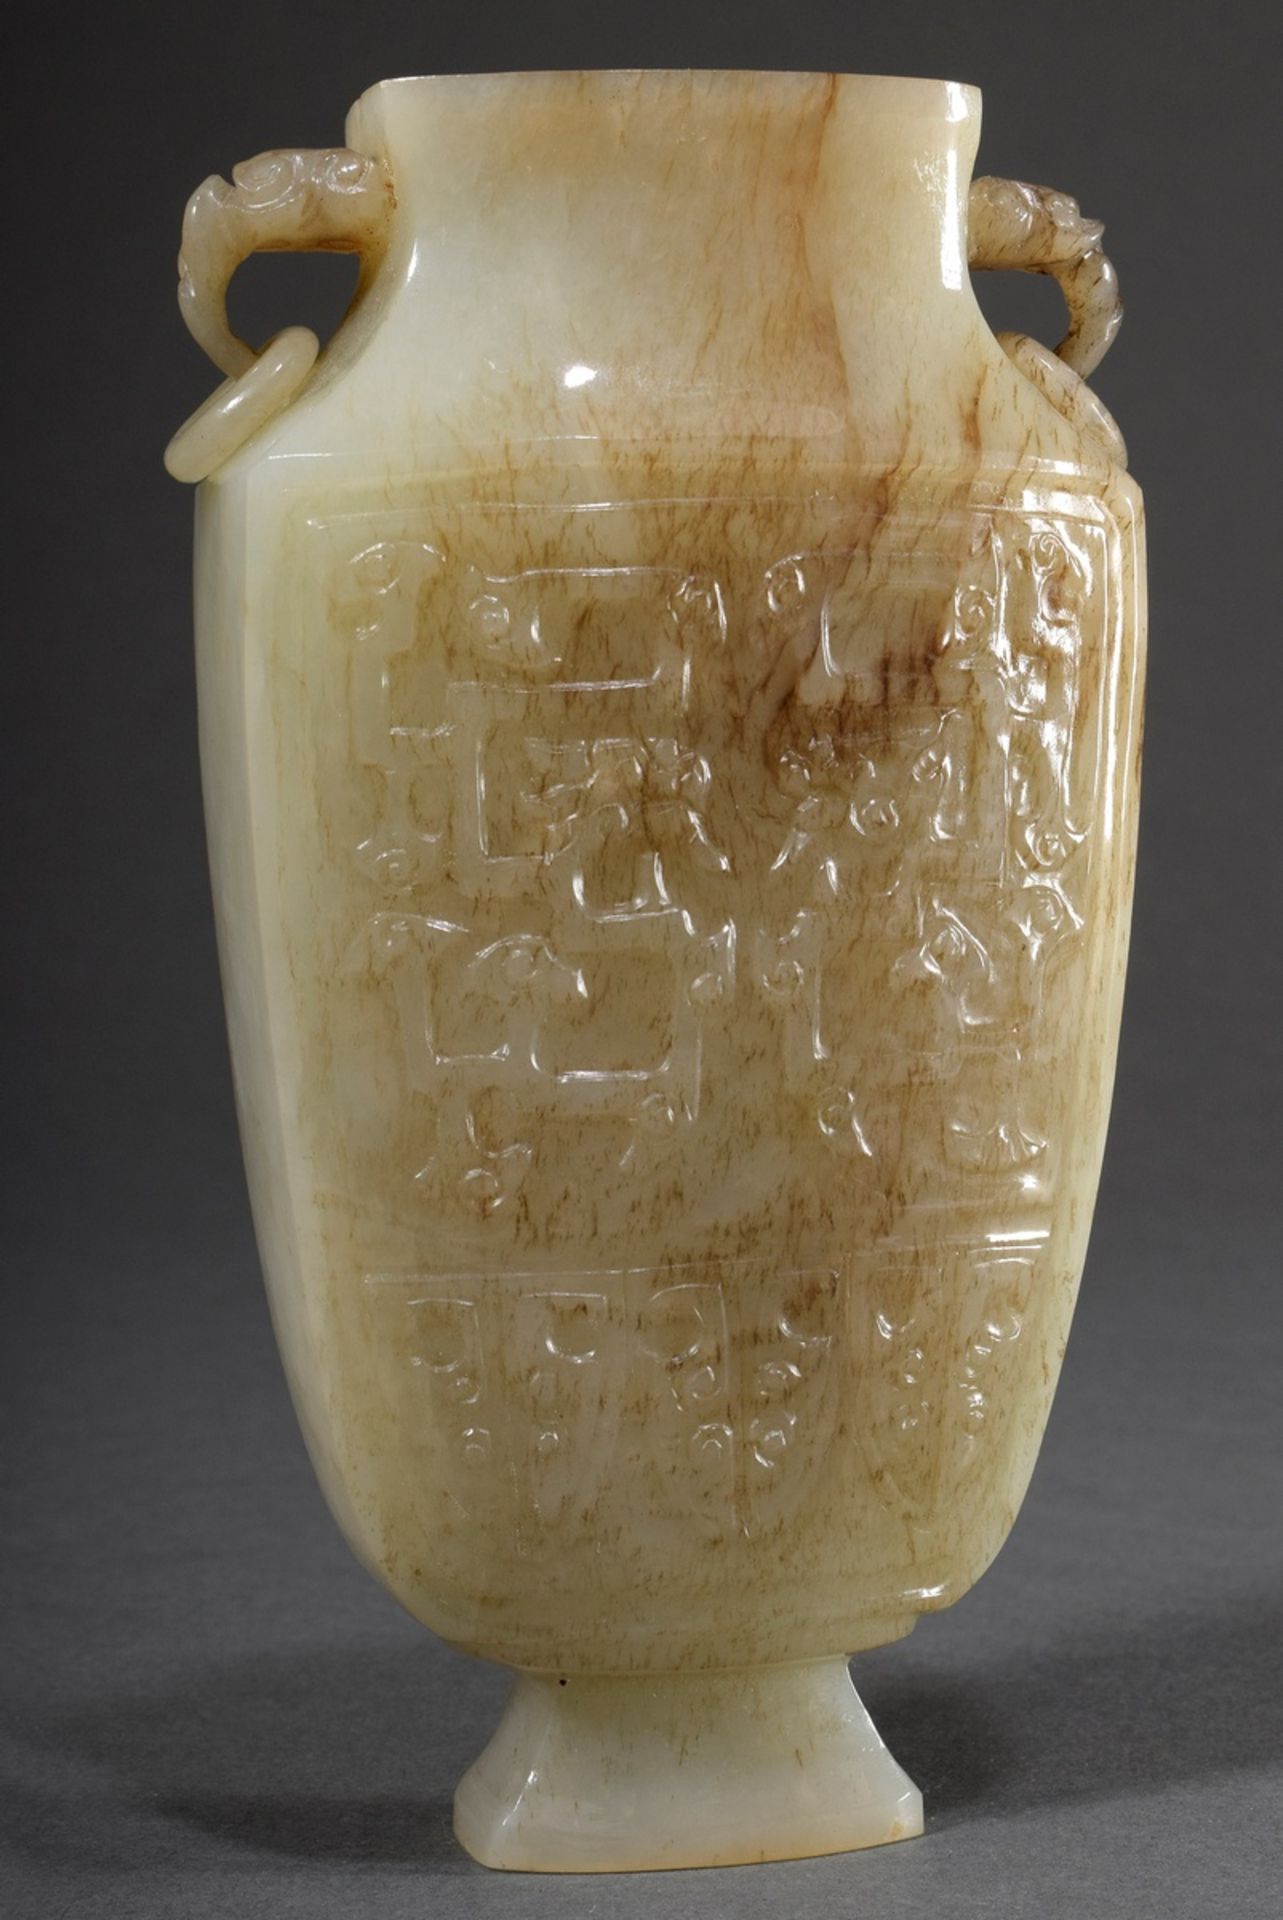 Small jade vase with archaic relief carving "dragon" on an angular body and zoomorphic ring handles - Image 2 of 5